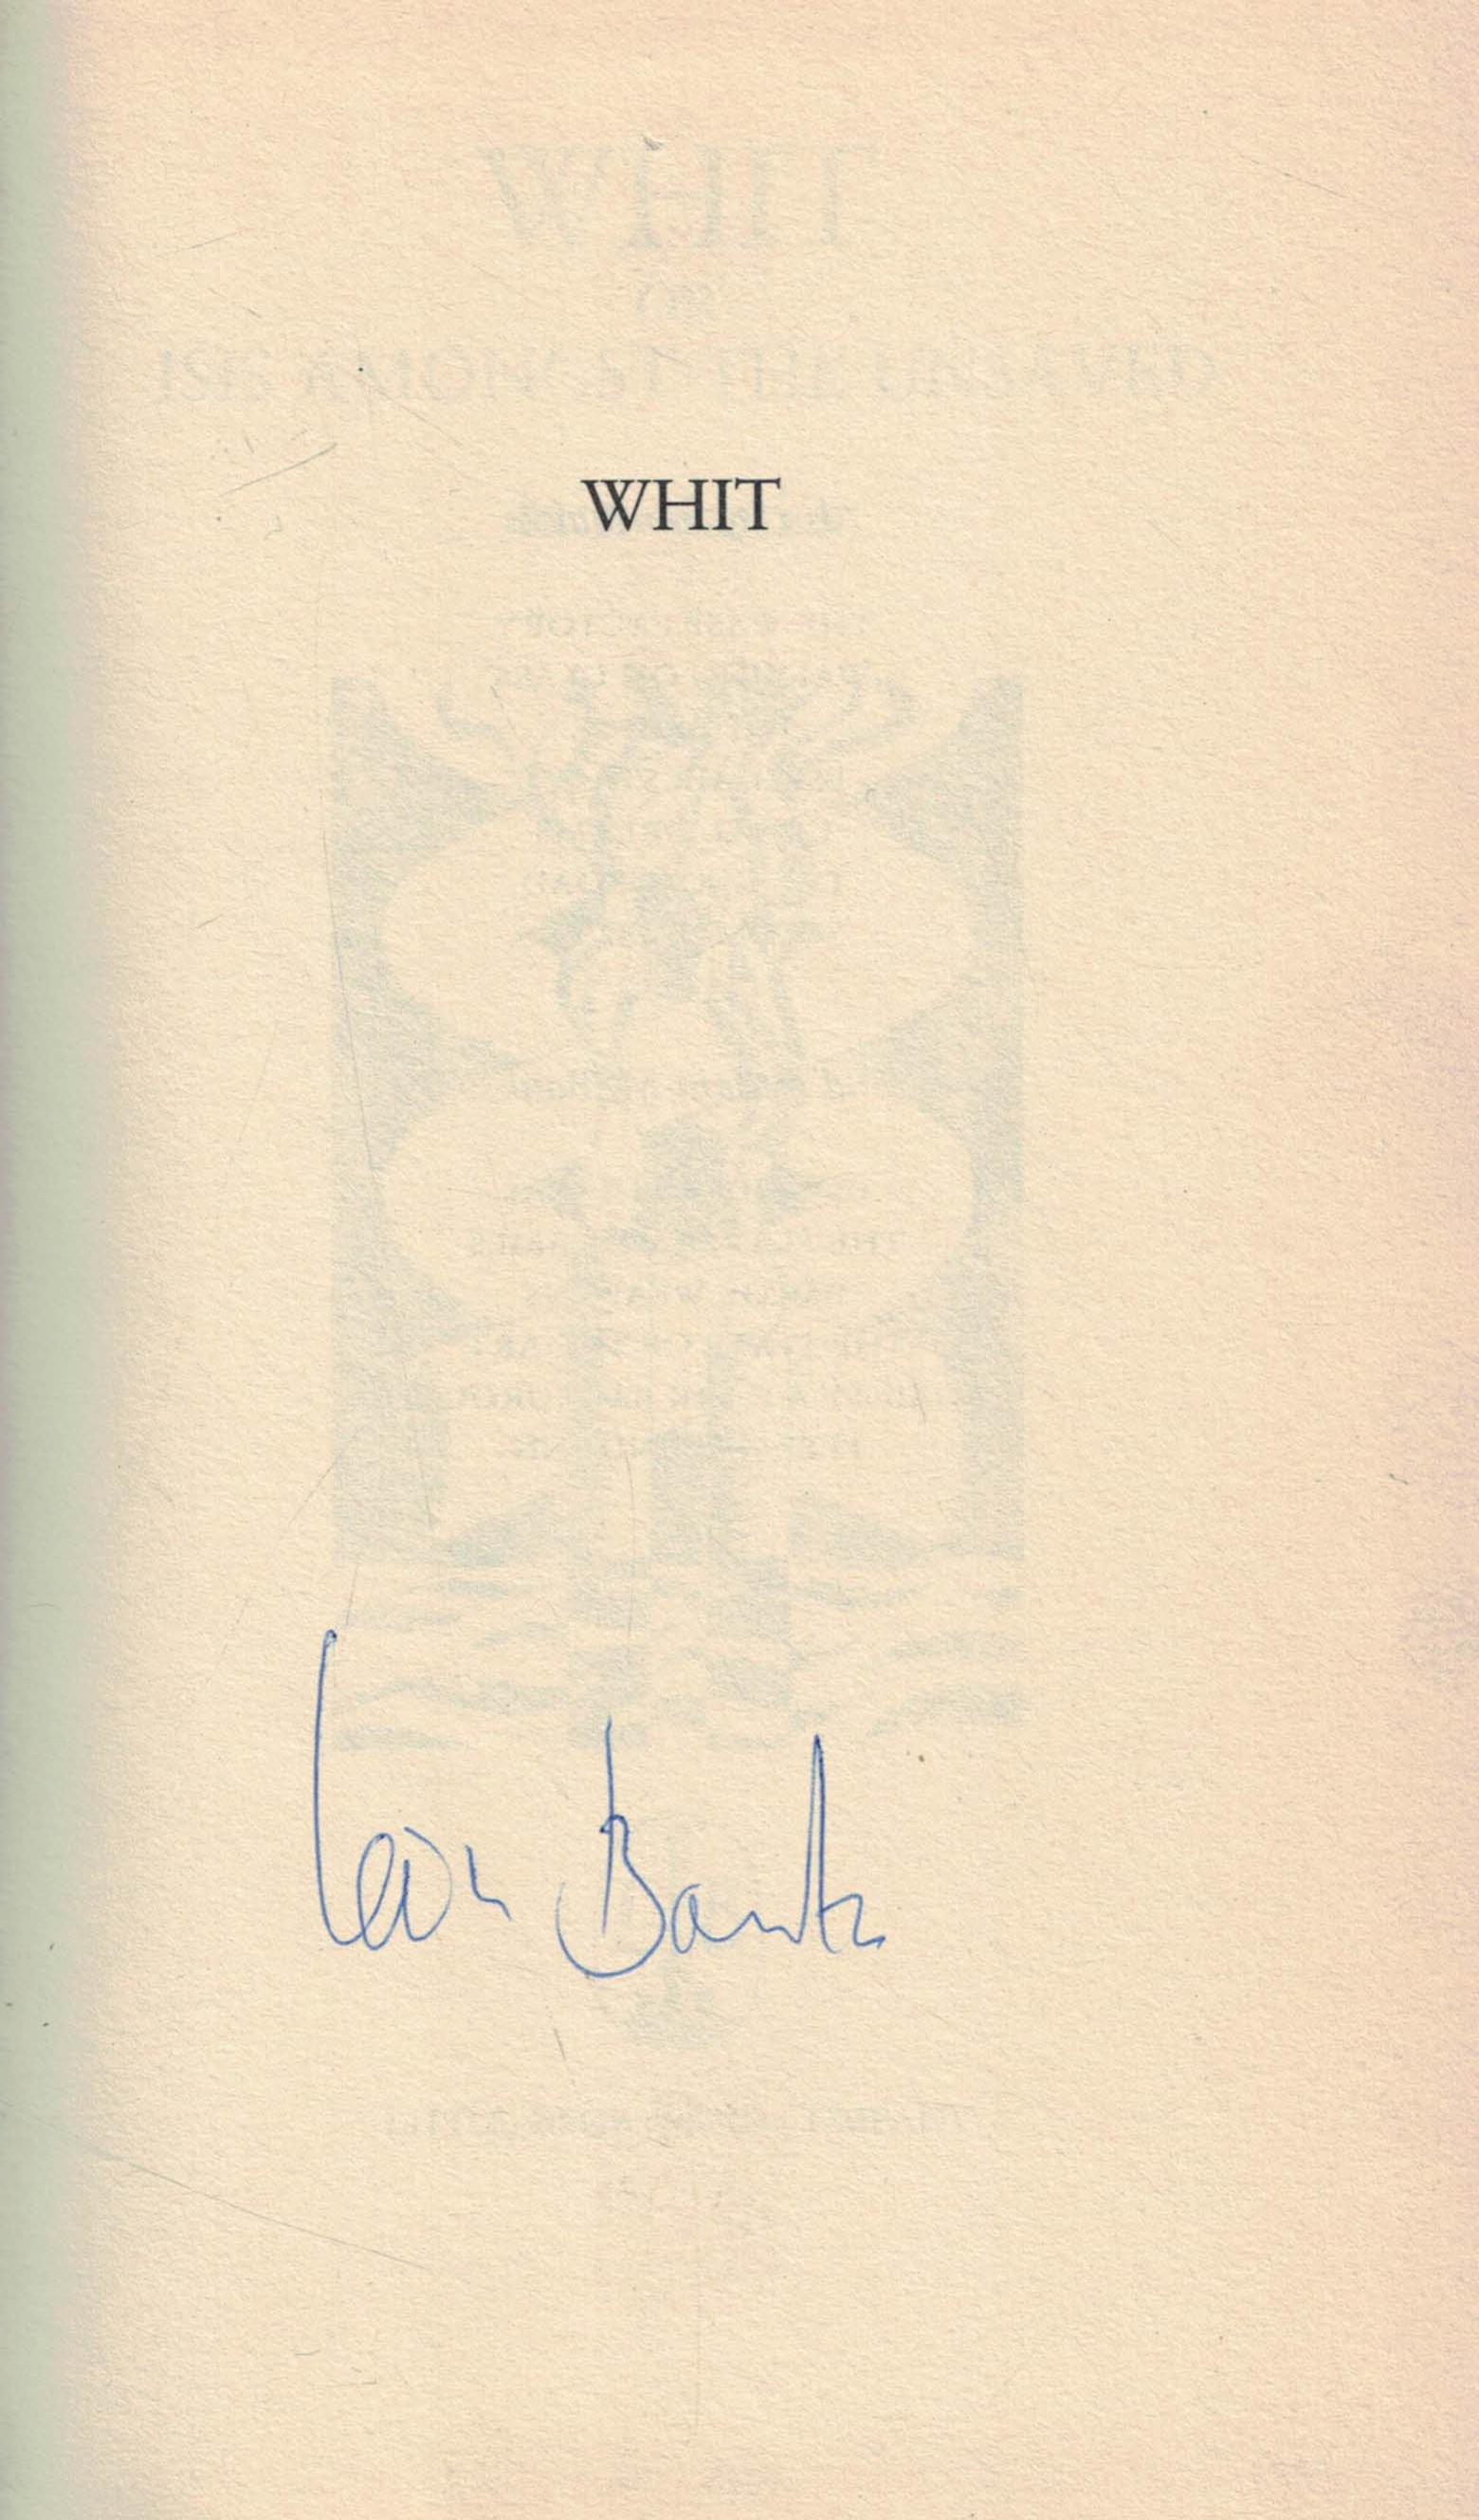 Whit. Or, Isis Amongst the Unsaved. Signed copy.